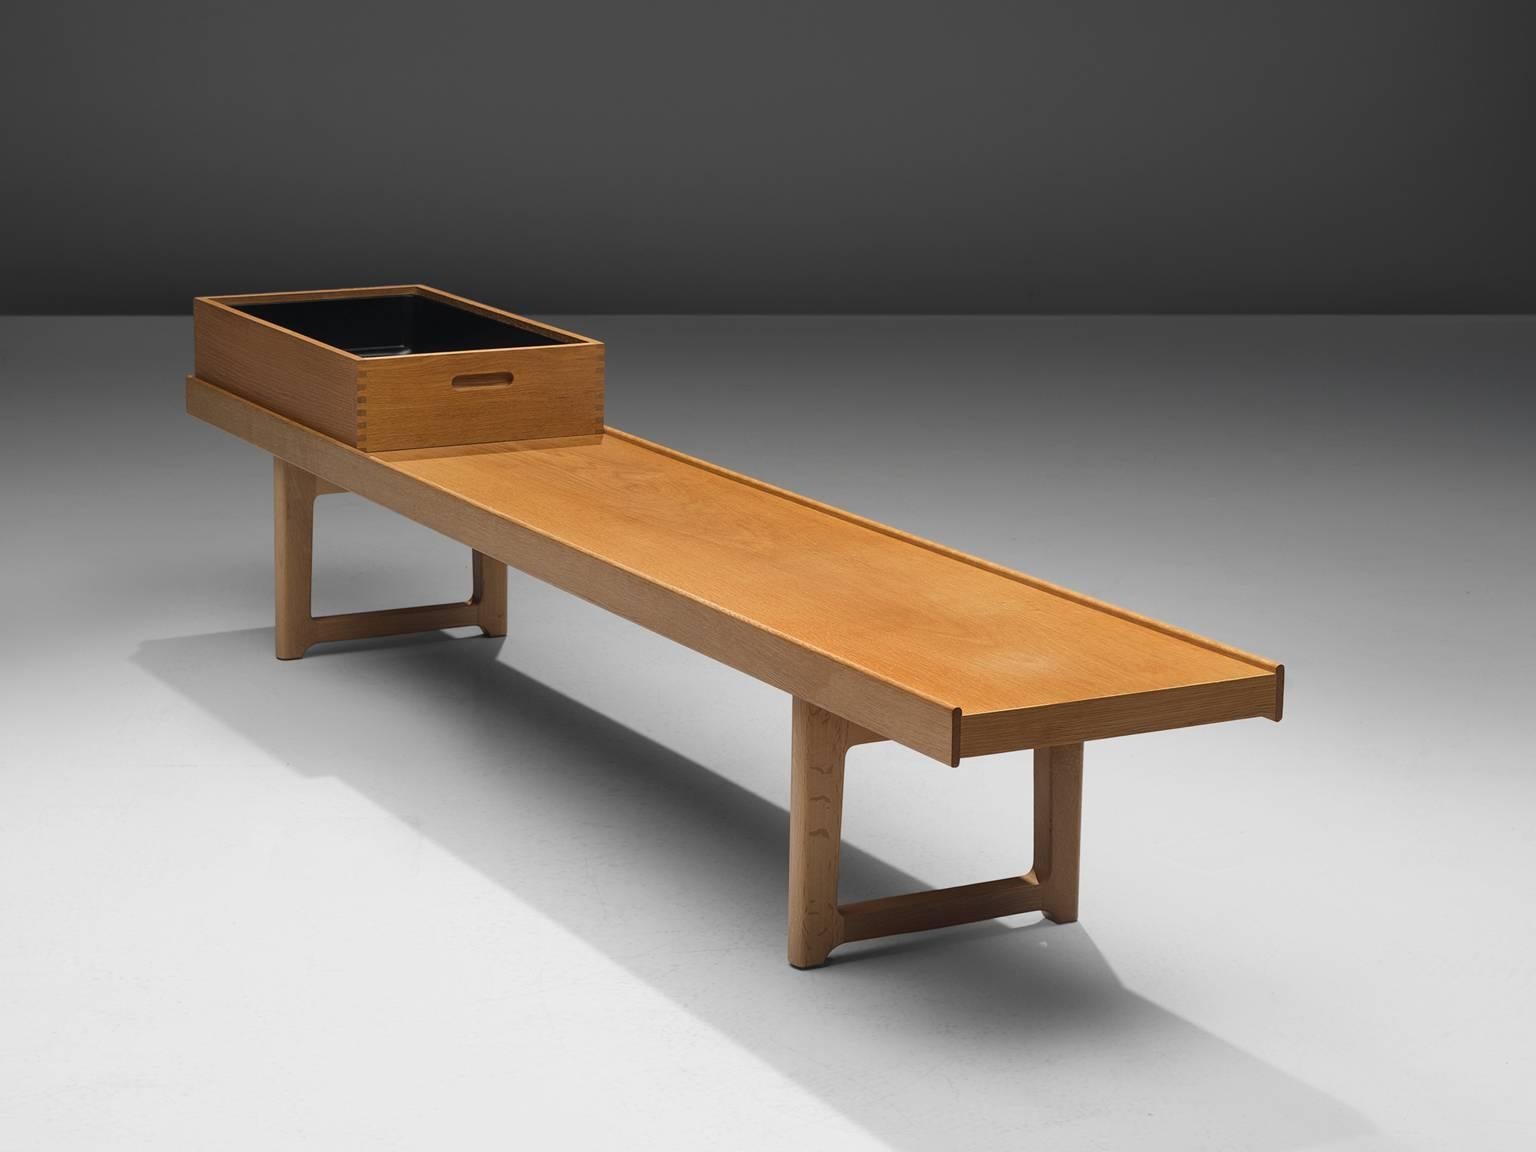 Torbjørn Afdal for Burksbo Mellemstrands Trevareindistri AS, 'Krobo' bench, oak, Norway, 1960s

This classic bench by Afdal is executed in oak and comes with one tray. The piece is stamped manufacturer's mark to each element. The piece is one of